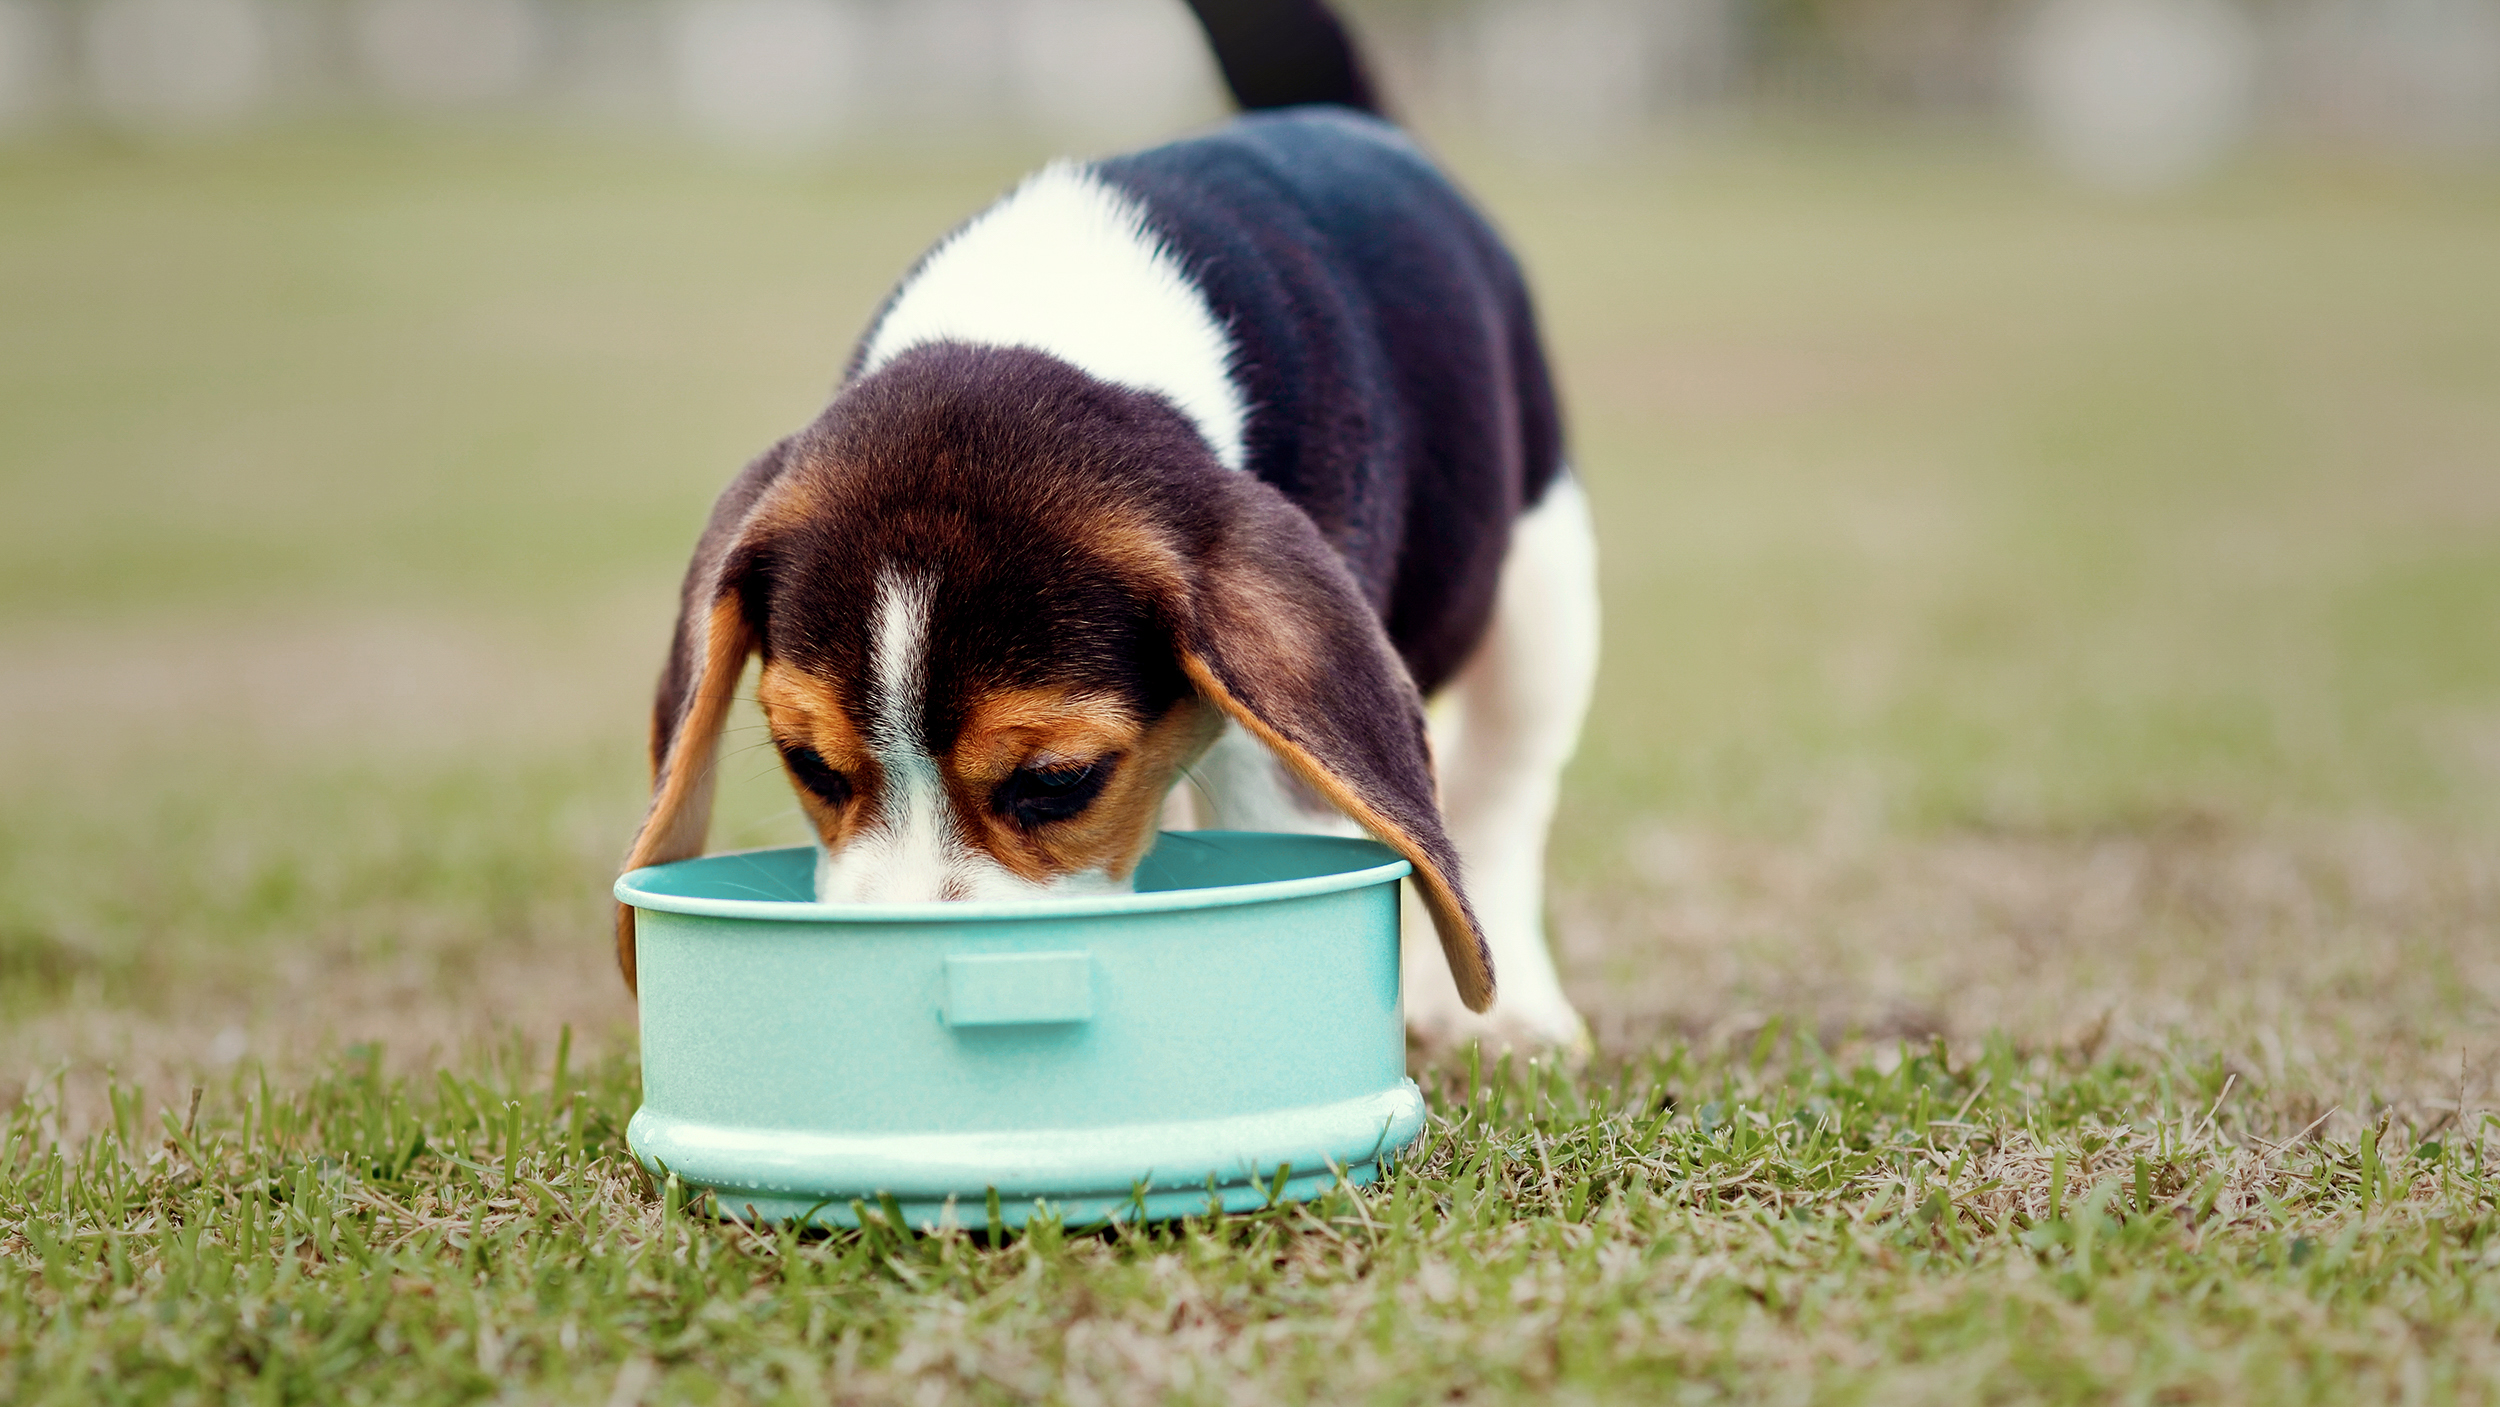 Puppy Beagle standing outside in a garden eating from a small bowl.